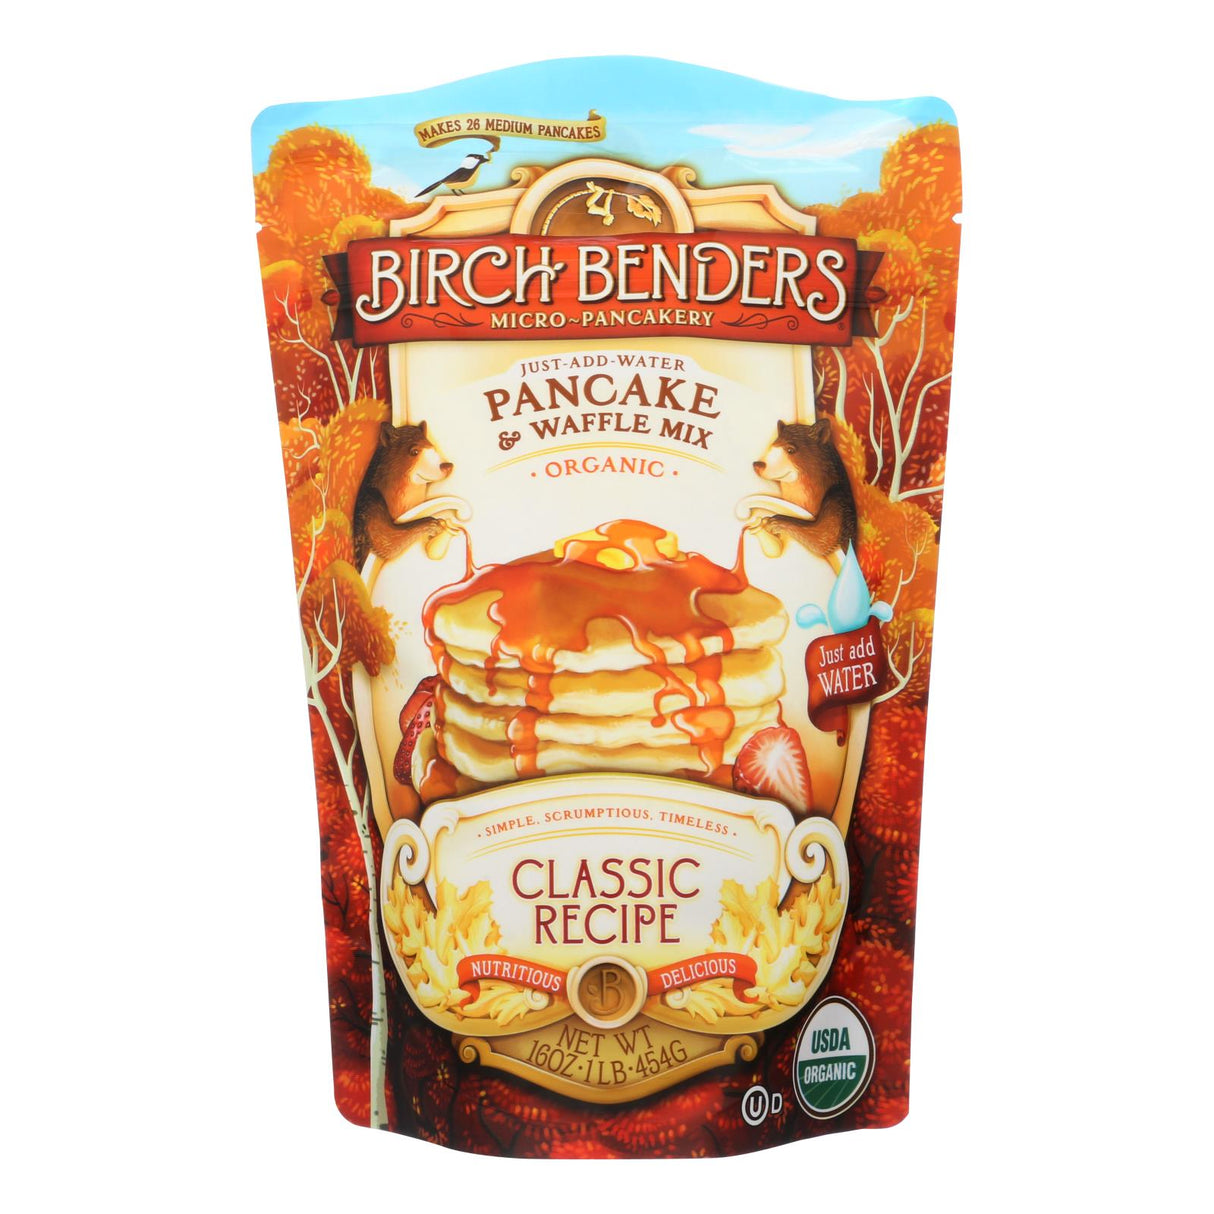 Birch Benders Pancake And Waffle Mix - Classic - Case Of 6 - 16 Oz.